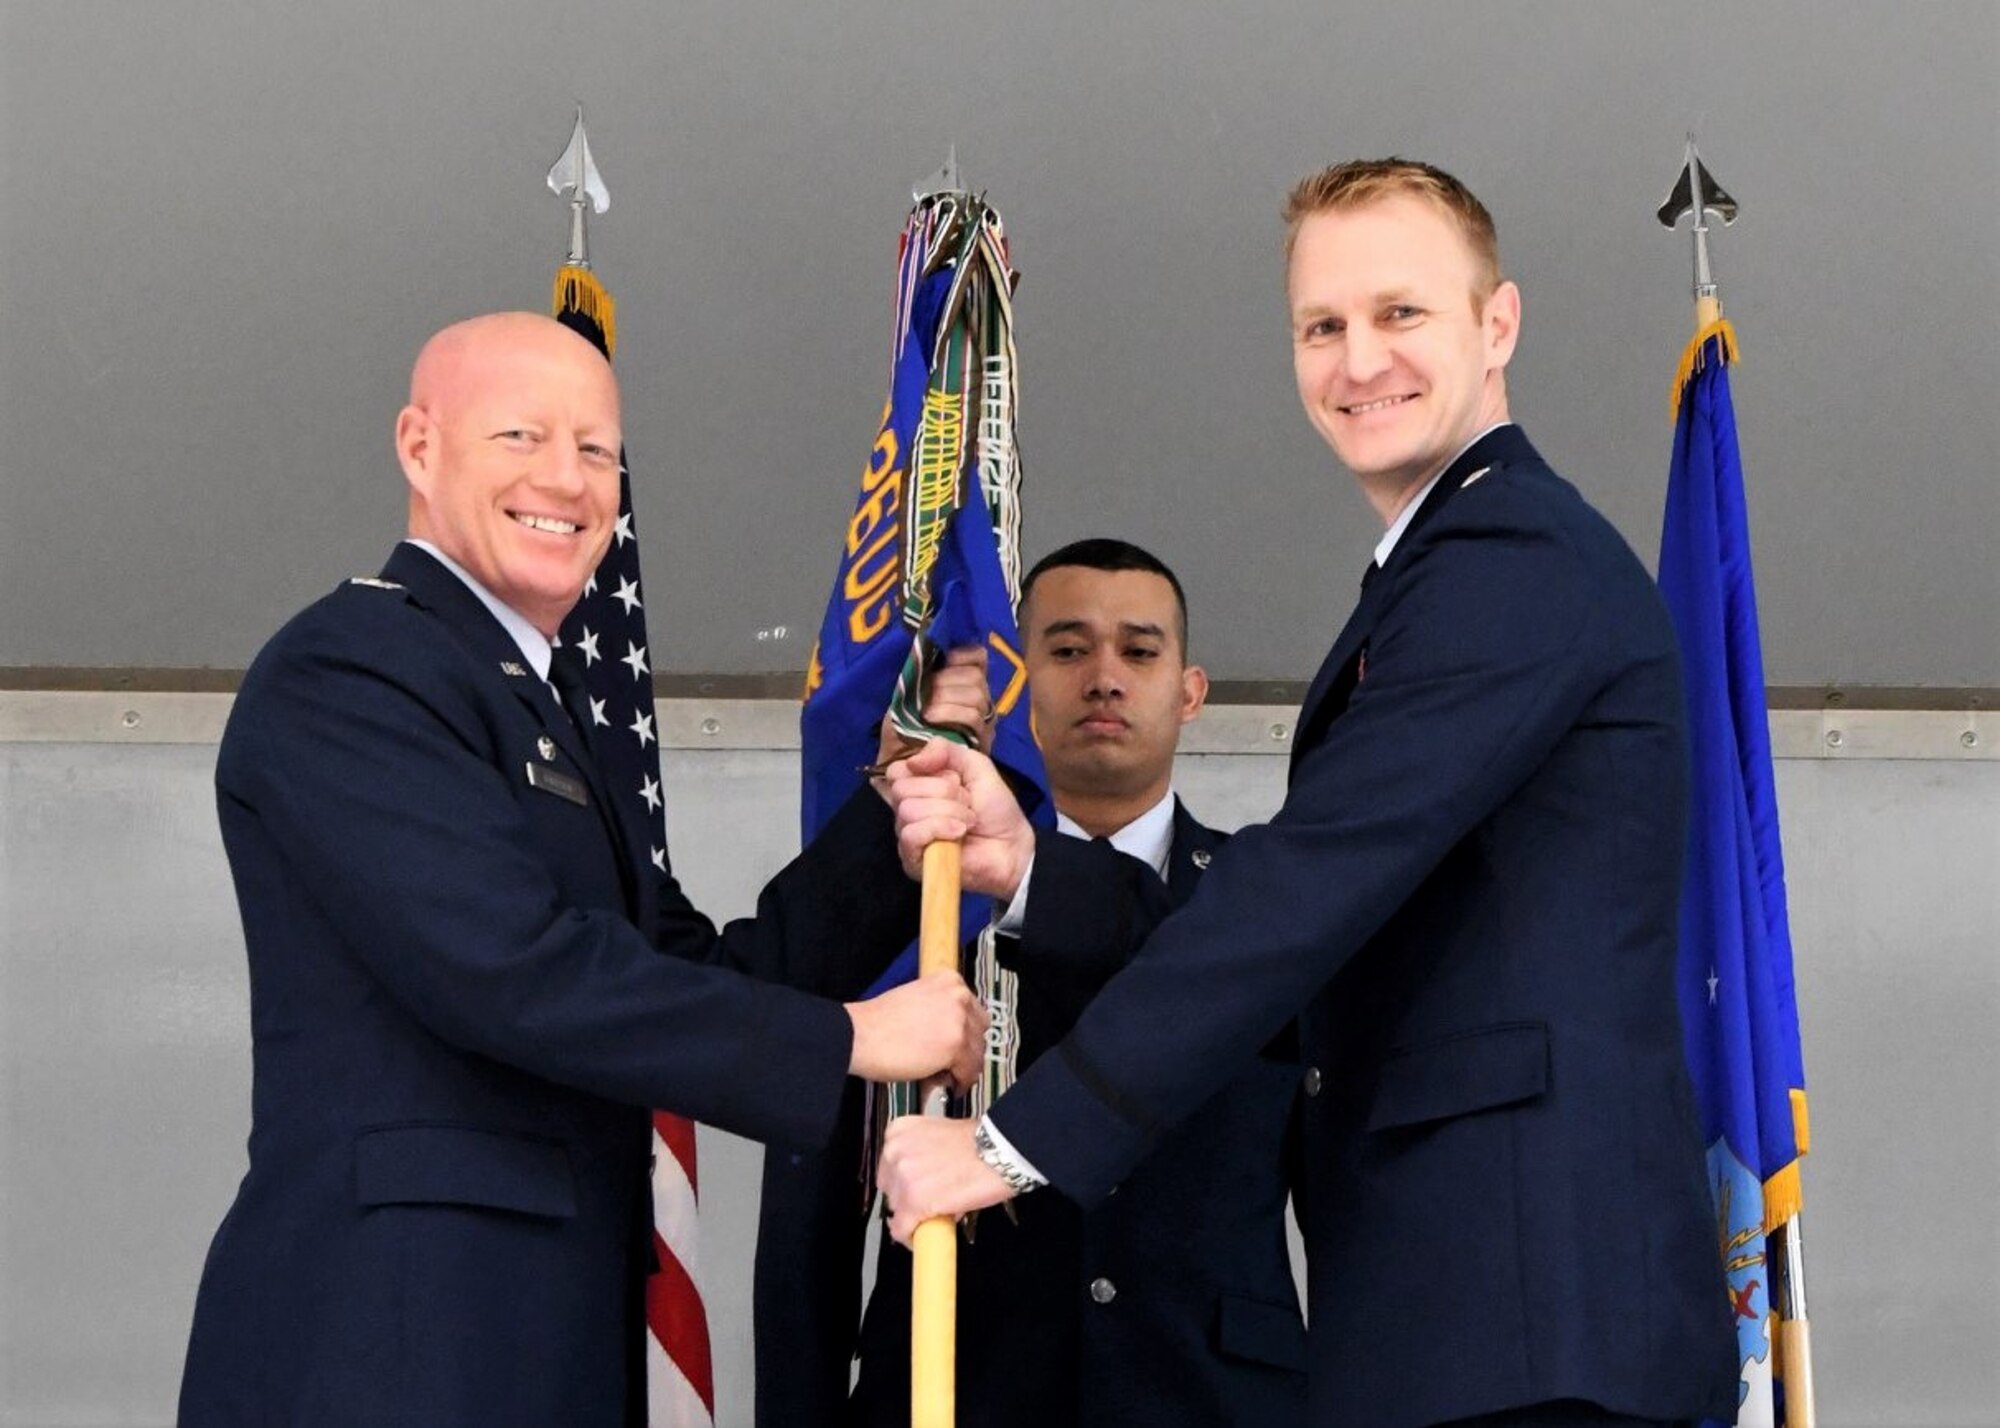 Col. Todd Tobergte, 926th Operations Group commander, hands the 706th Fighter Squadron guidon to Lt. Col. Michael Fisher, 706th FS commander, during a change of command ceremony held Jan. 31, 2020, at Nellis Air Force Base, Nev. The 706th FS seamlessly integrates Reserve personnel into the United States Air Force Warfare Center’s test and training mission.